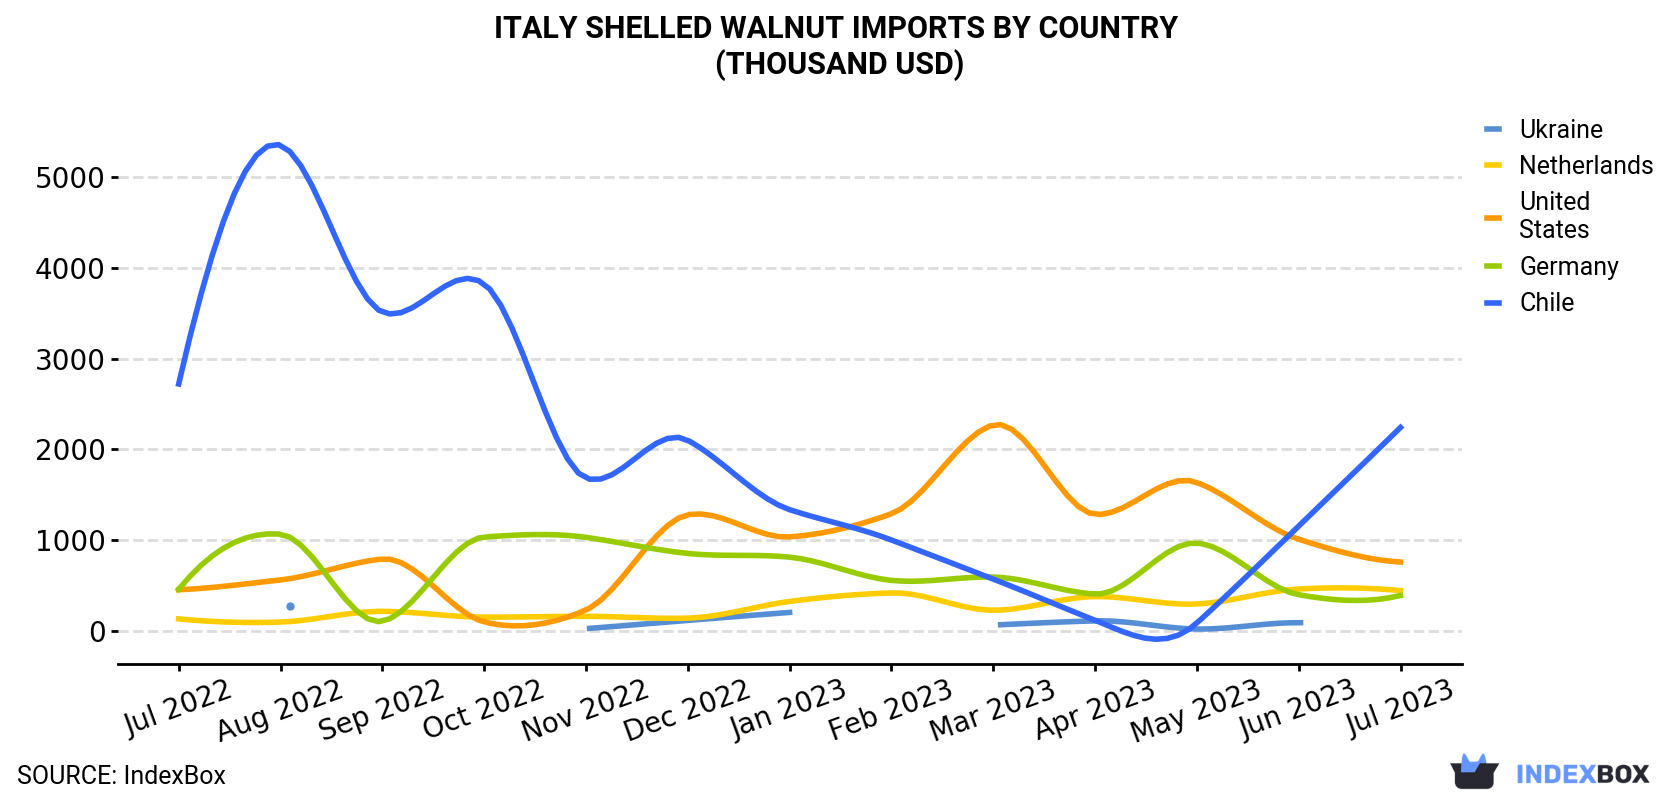 Italy Shelled Walnut Imports By Country (Thousand USD)